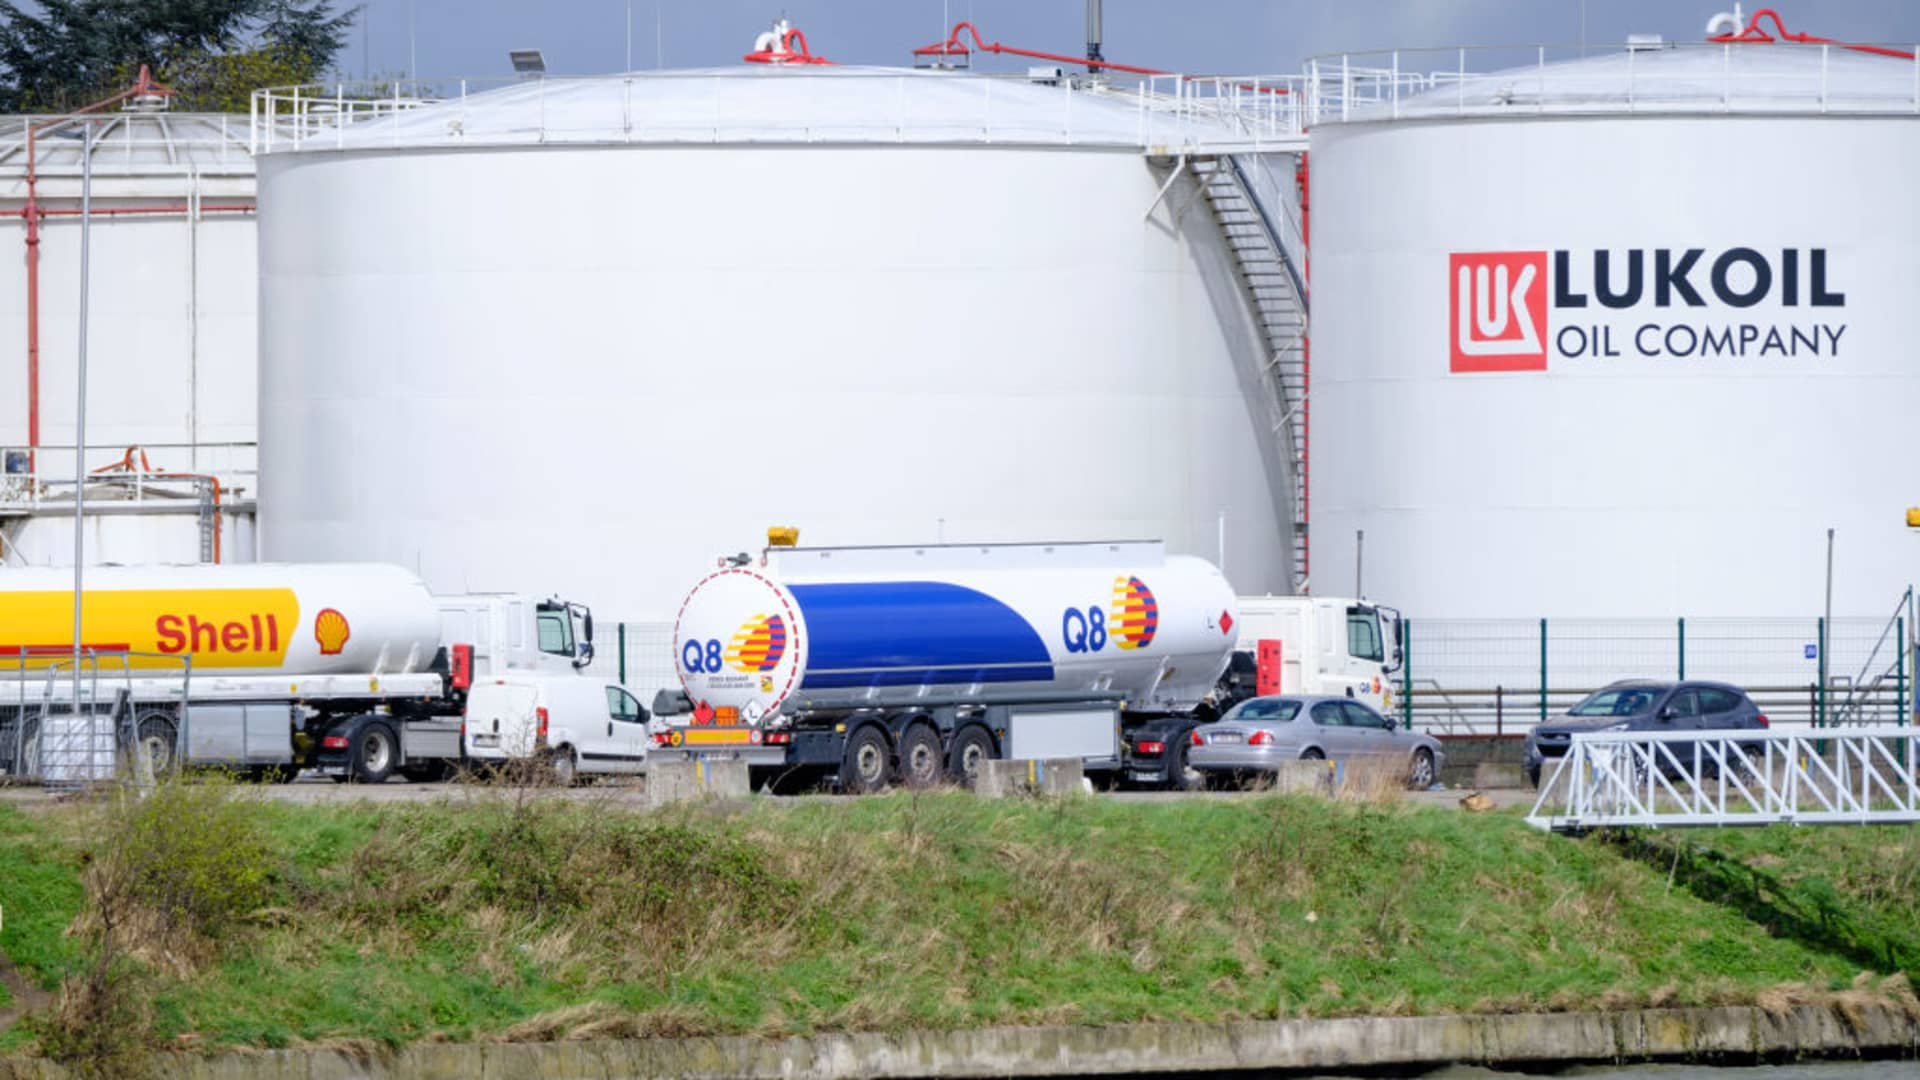 The russian multinational energy corporation Lukoil depot of Neder-Over-Heembeek is seen on April 7, 2022 in Brussels, Belgium.